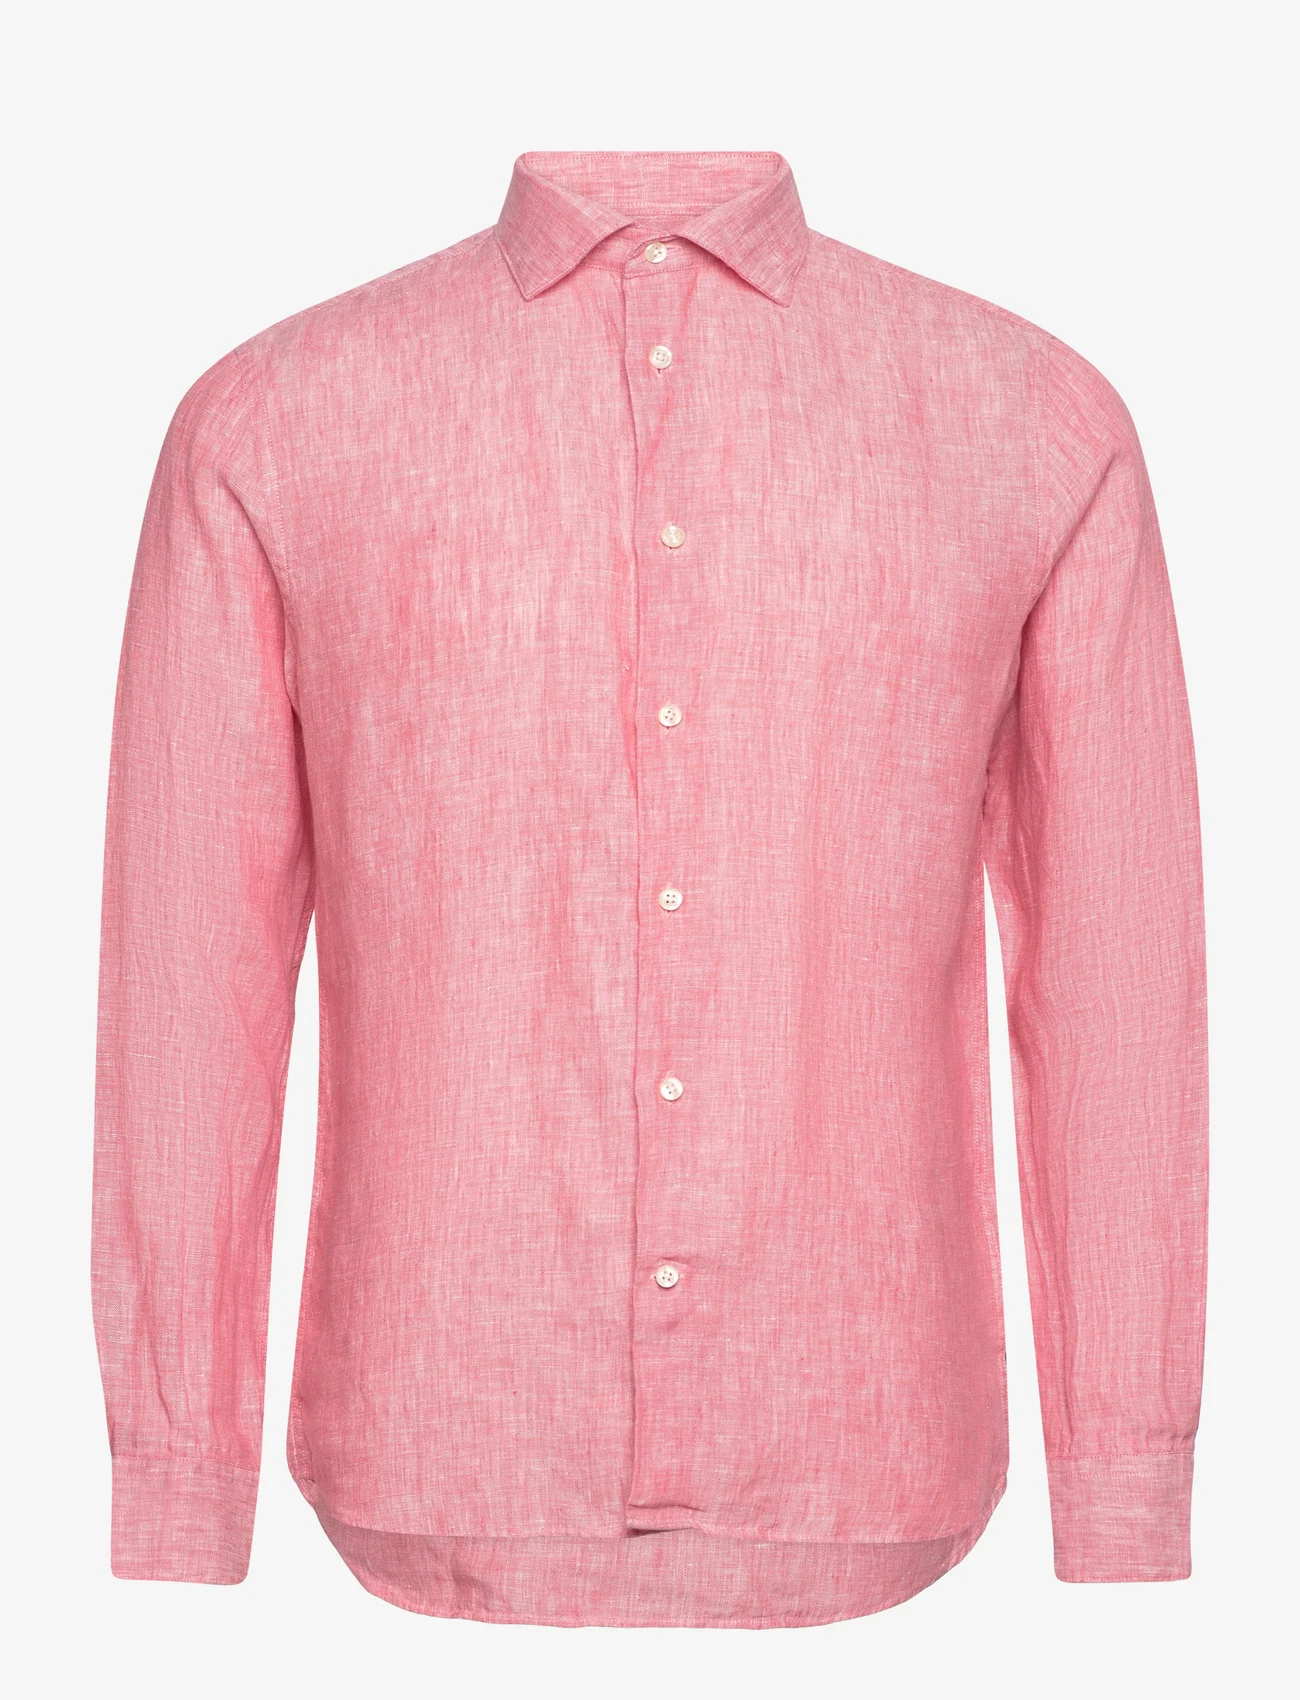 Matinique - MAmarc short - linen shirts - faded rose - 0